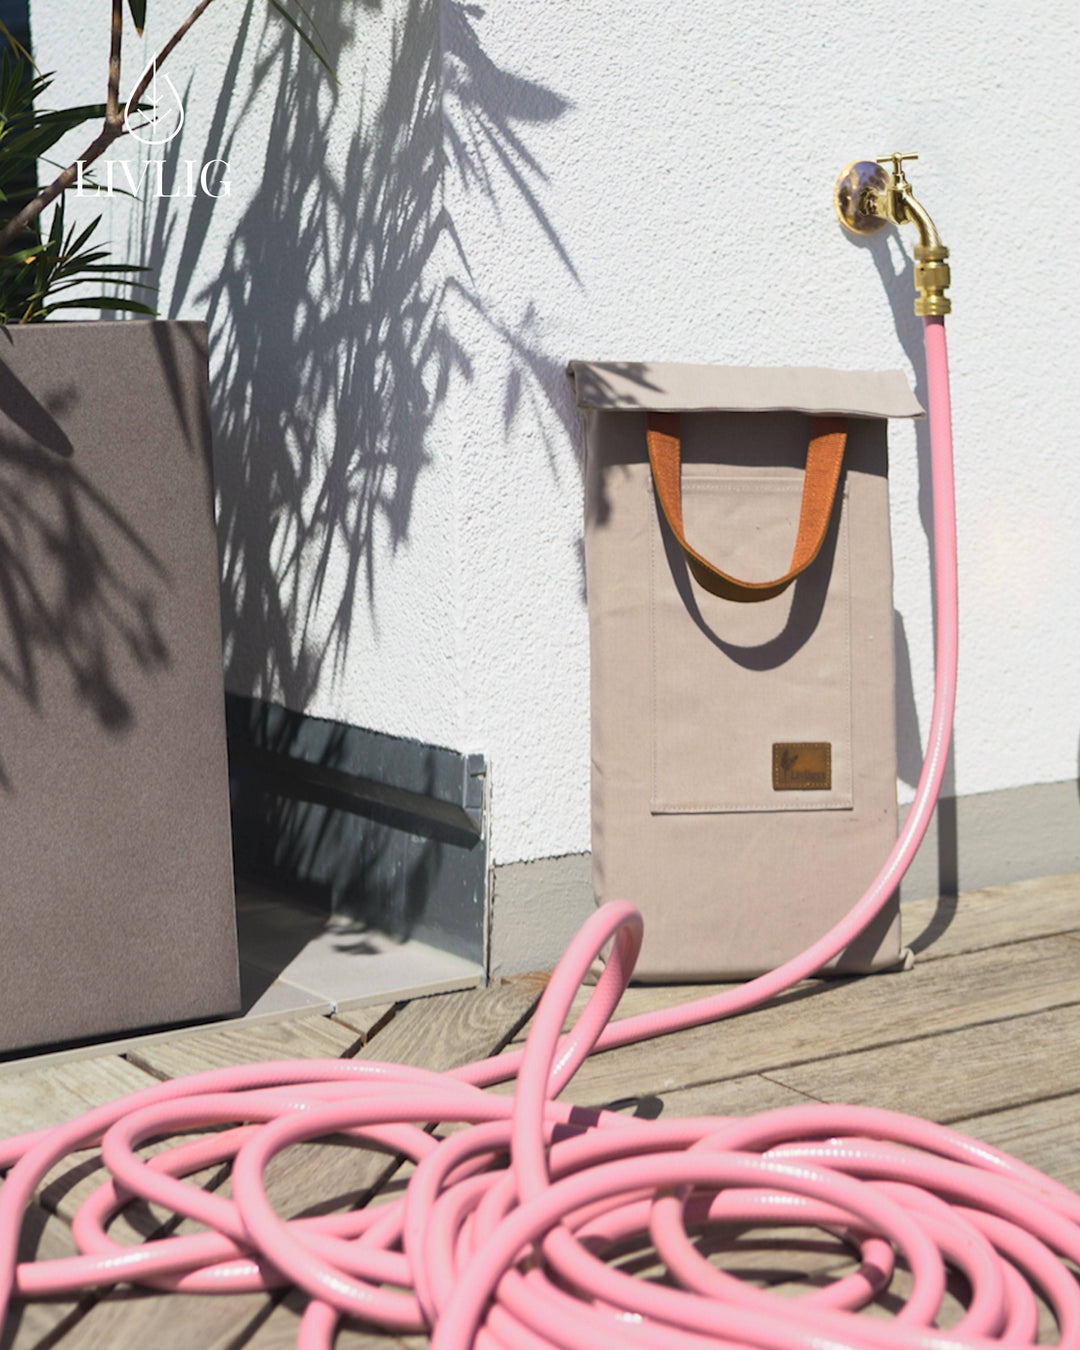 a pink hose laying on a wooden deck next to a bag